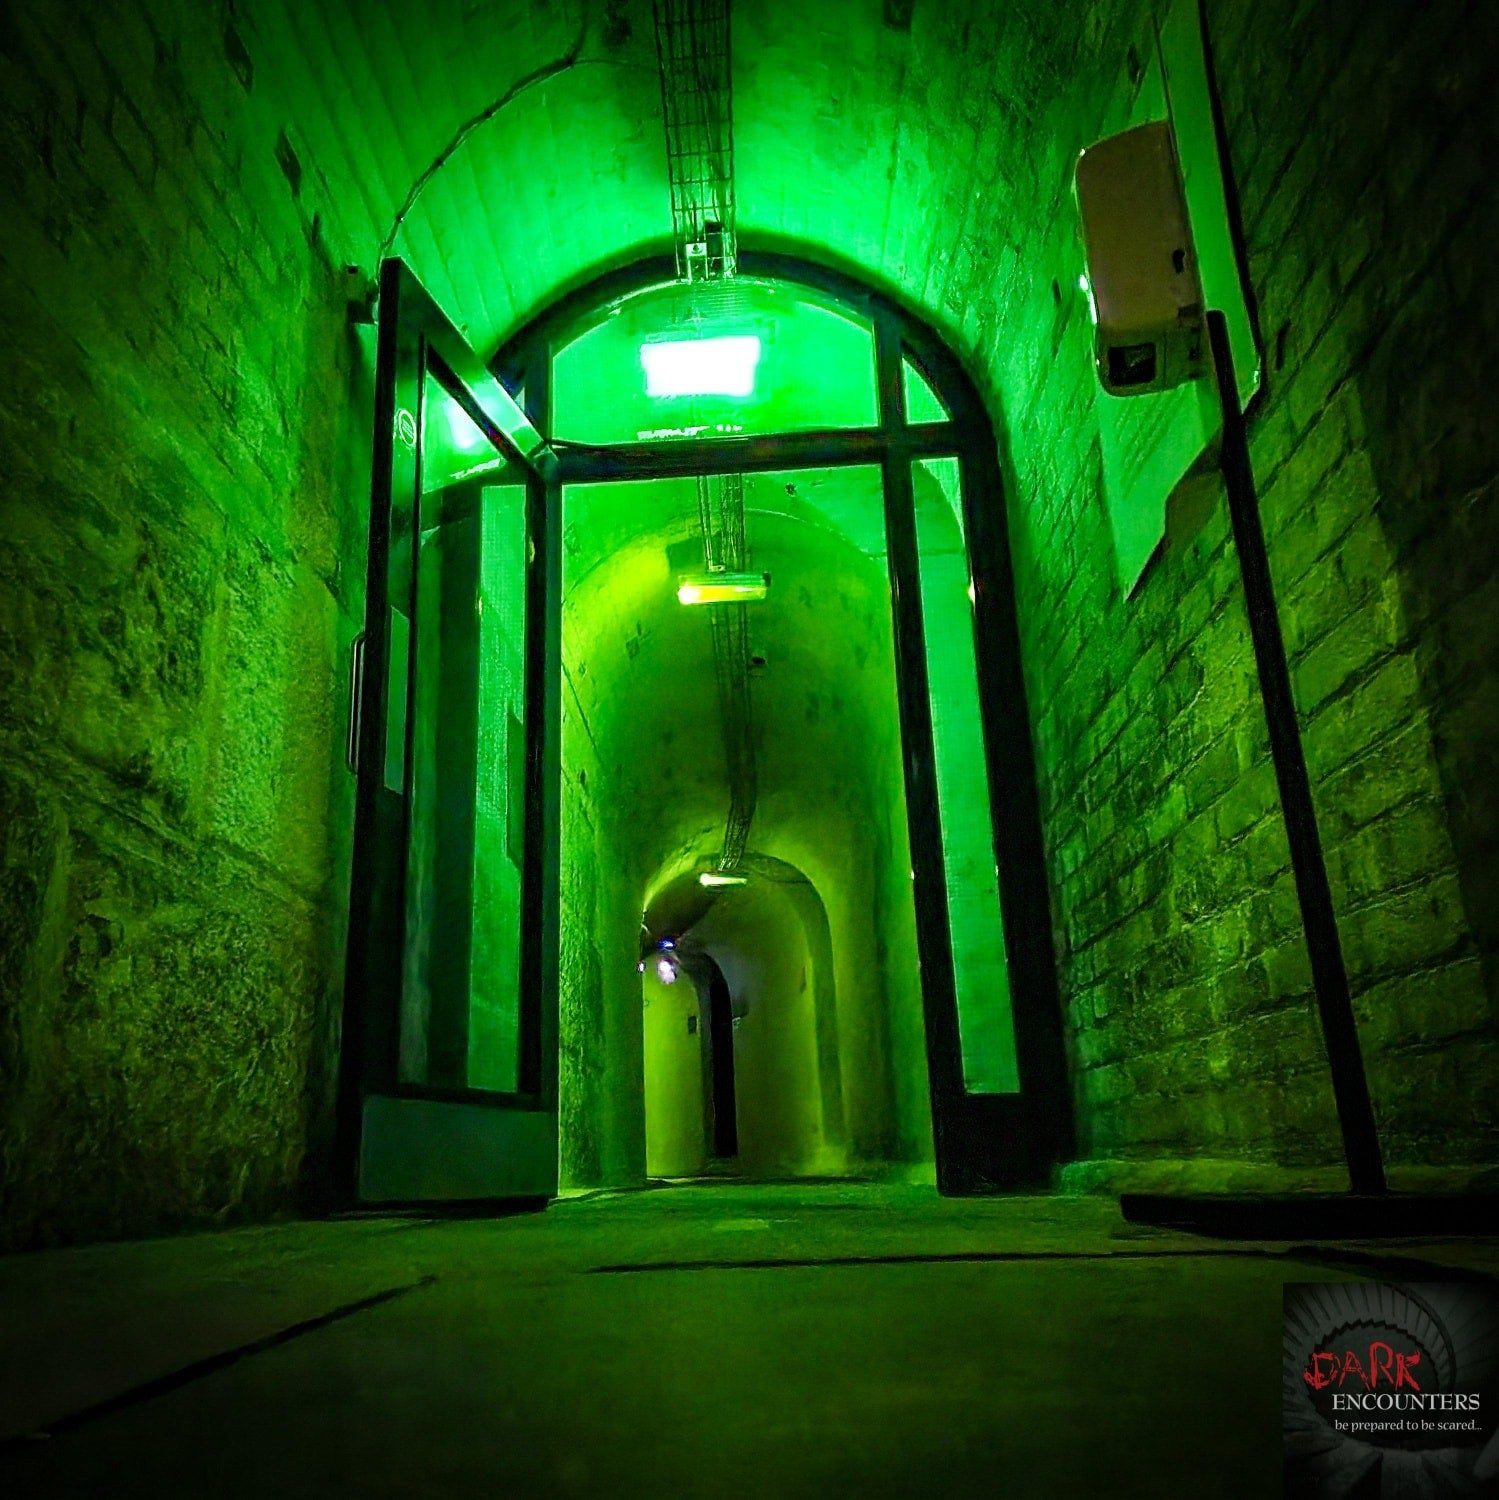 An ominous green corridor leads into a mystery haunted location